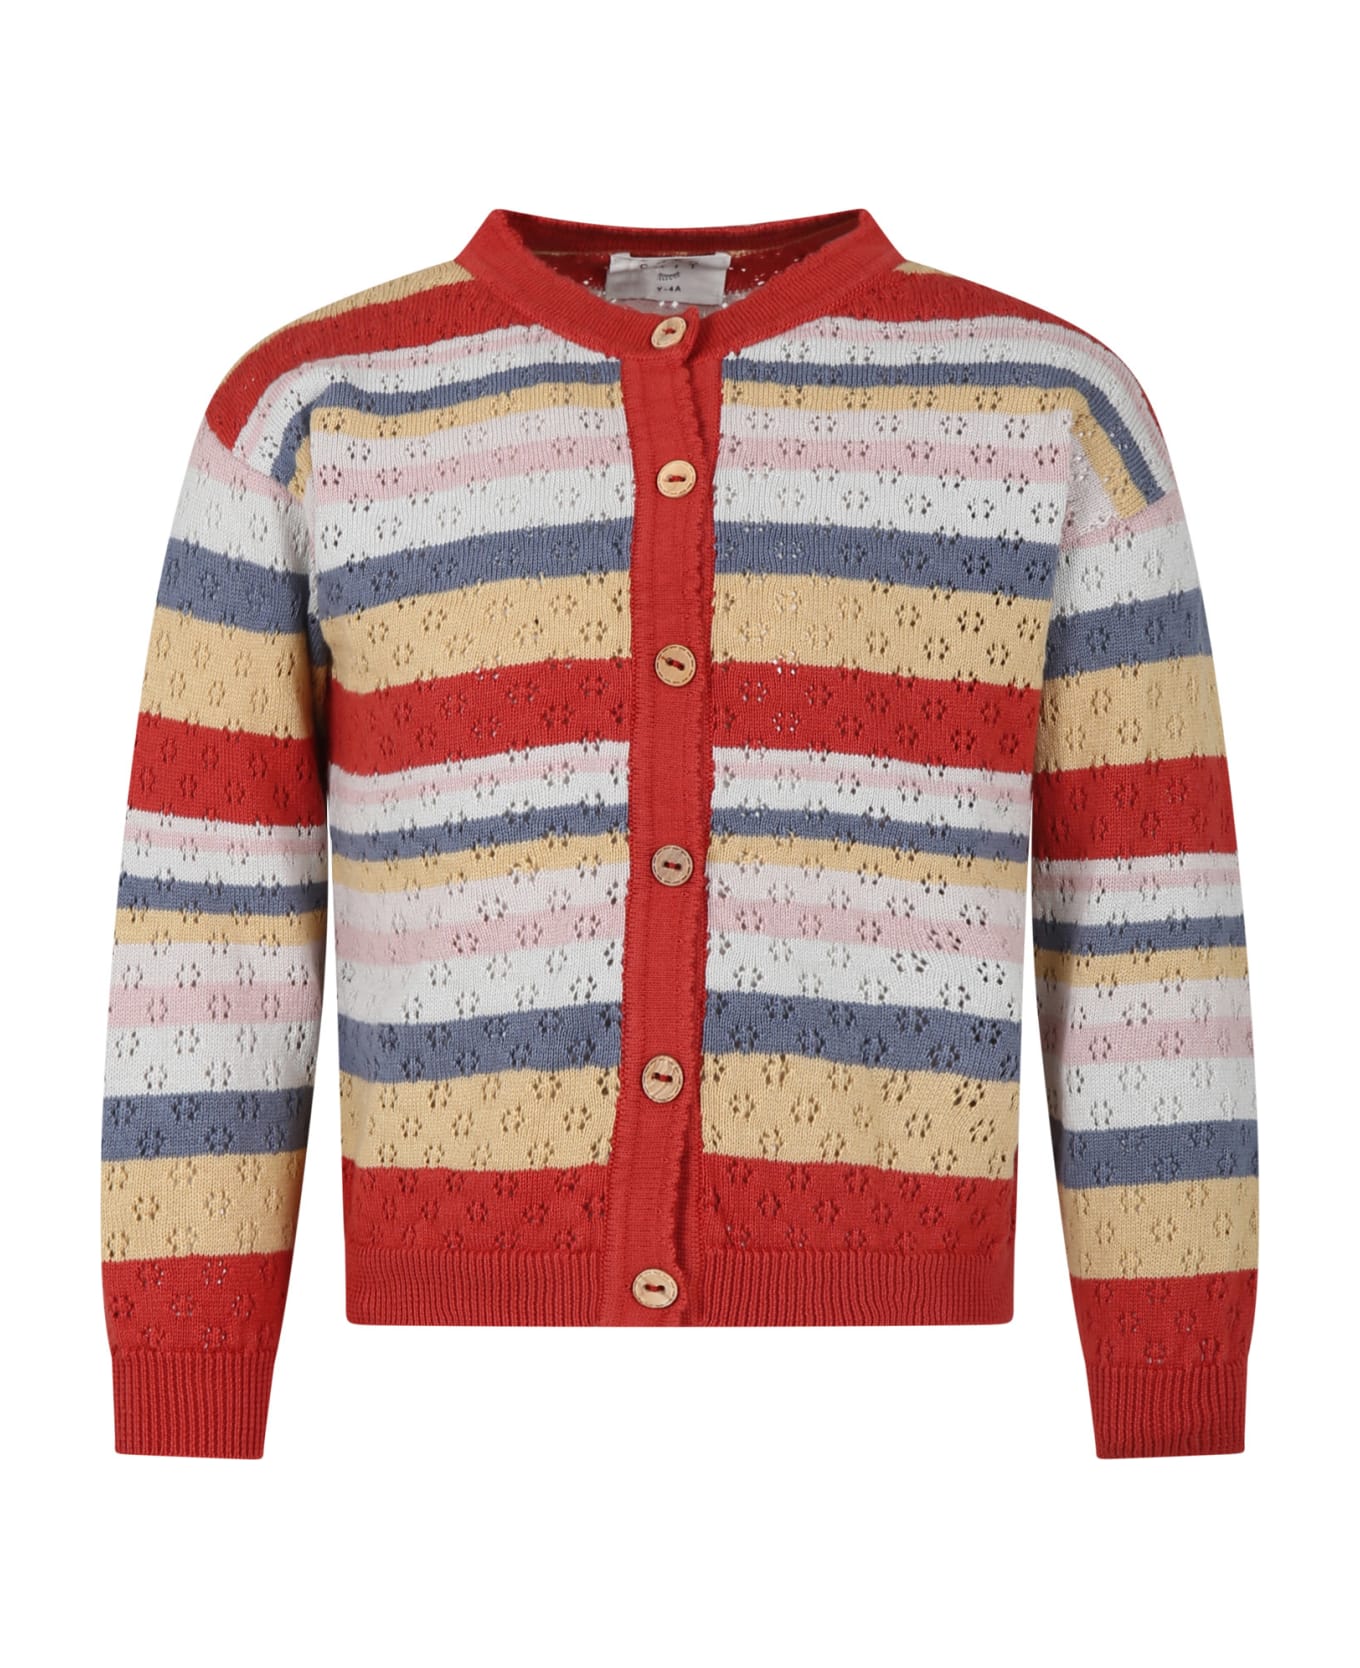 Coco Au Lait Red Cardigan For Girl With Striped Pattern - Multicolor